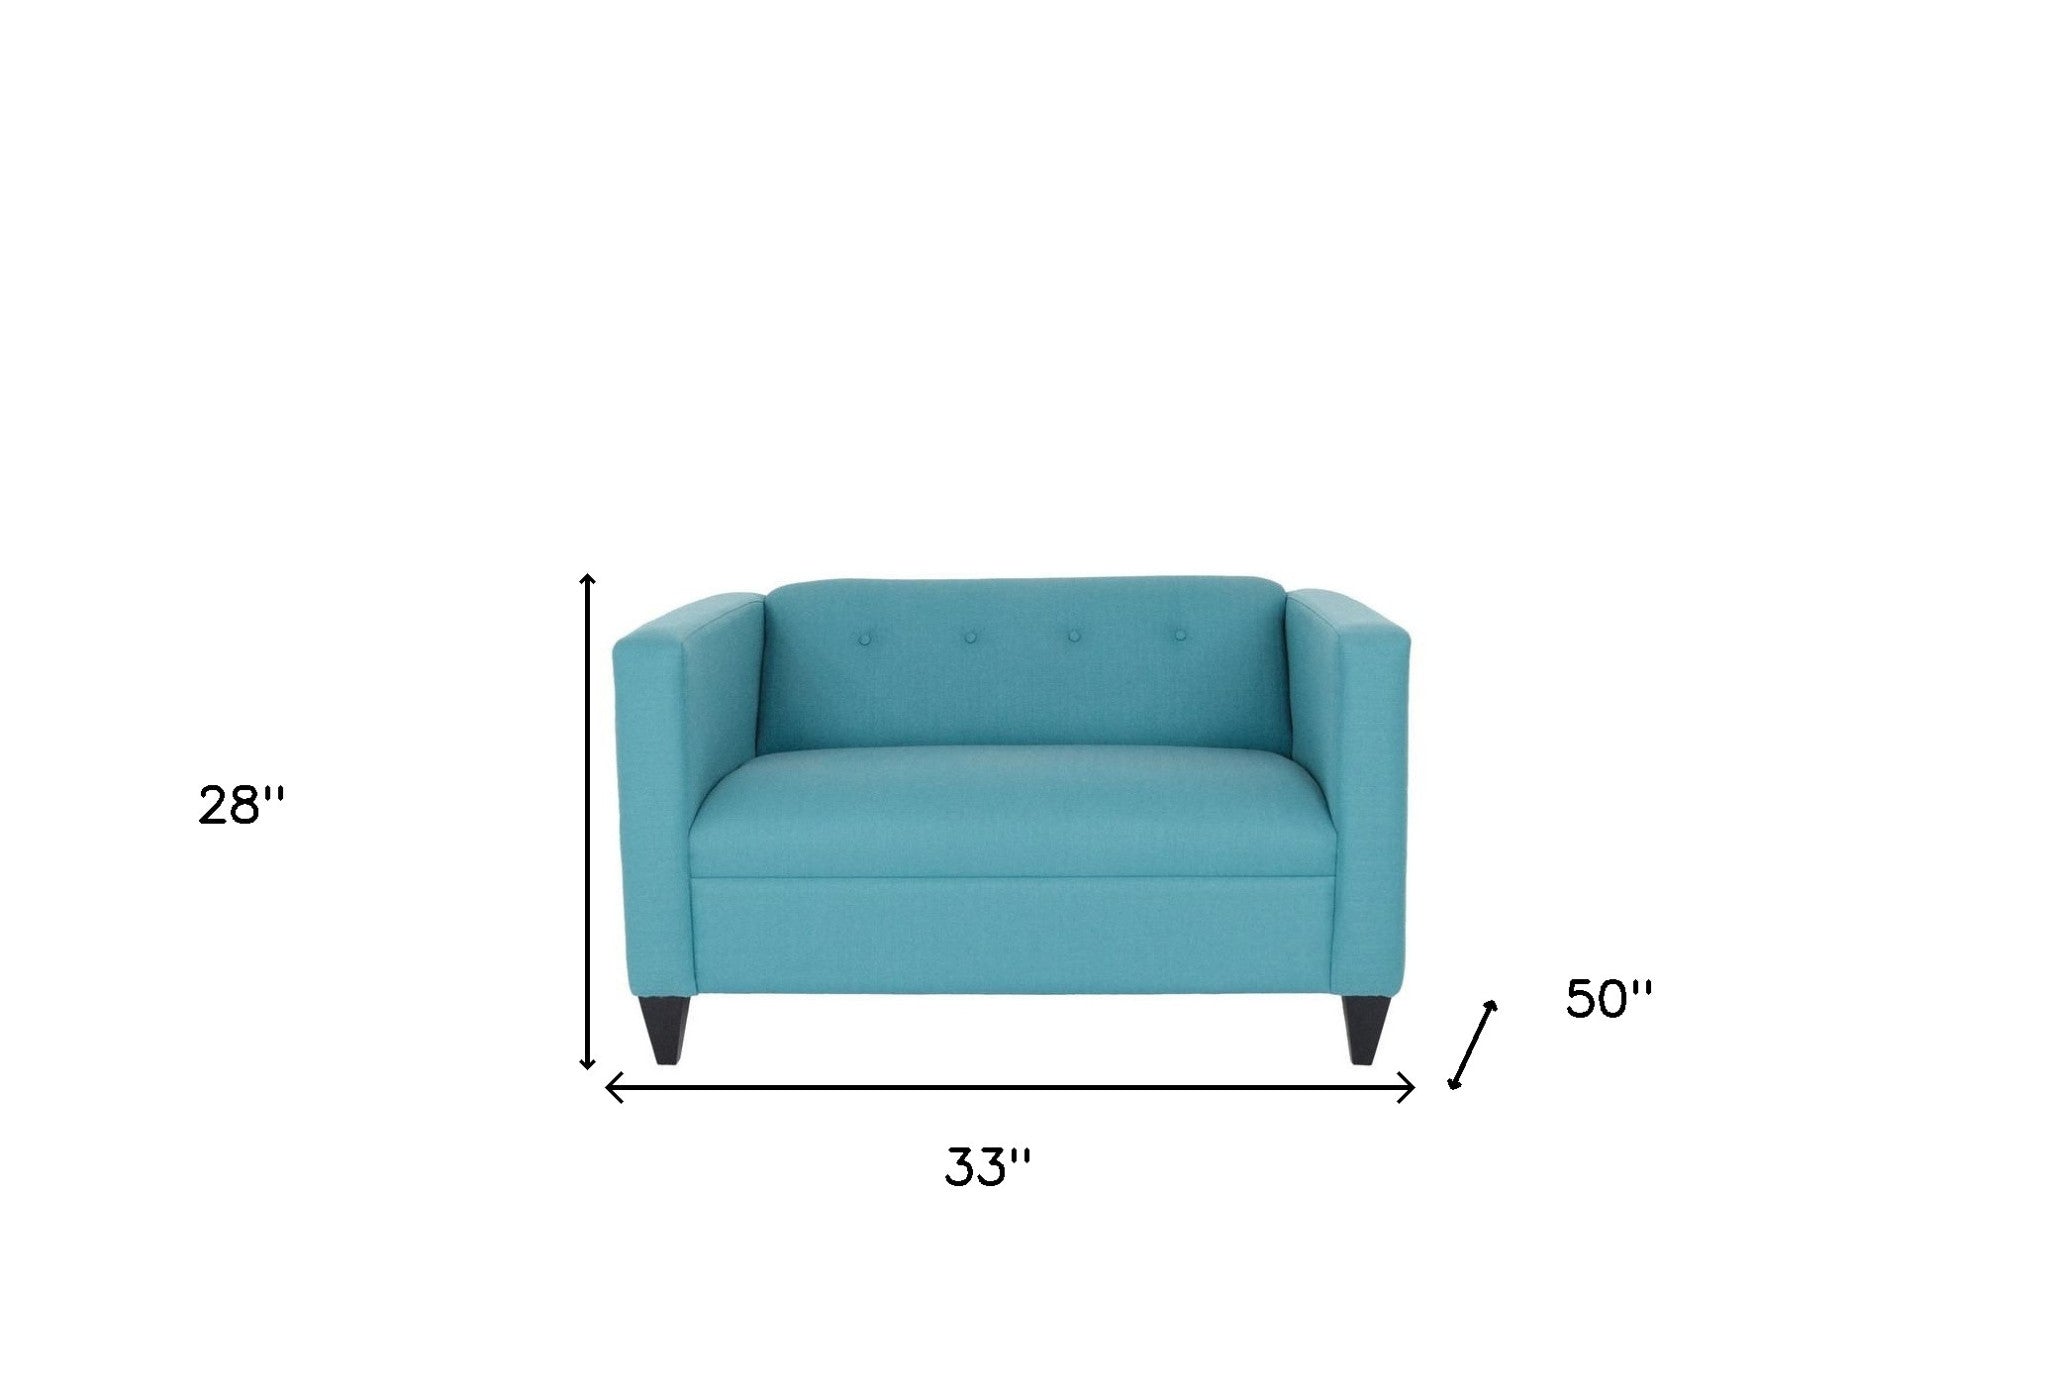 50" Teal Blue And Dark Brown Polyester Blend Loveseat